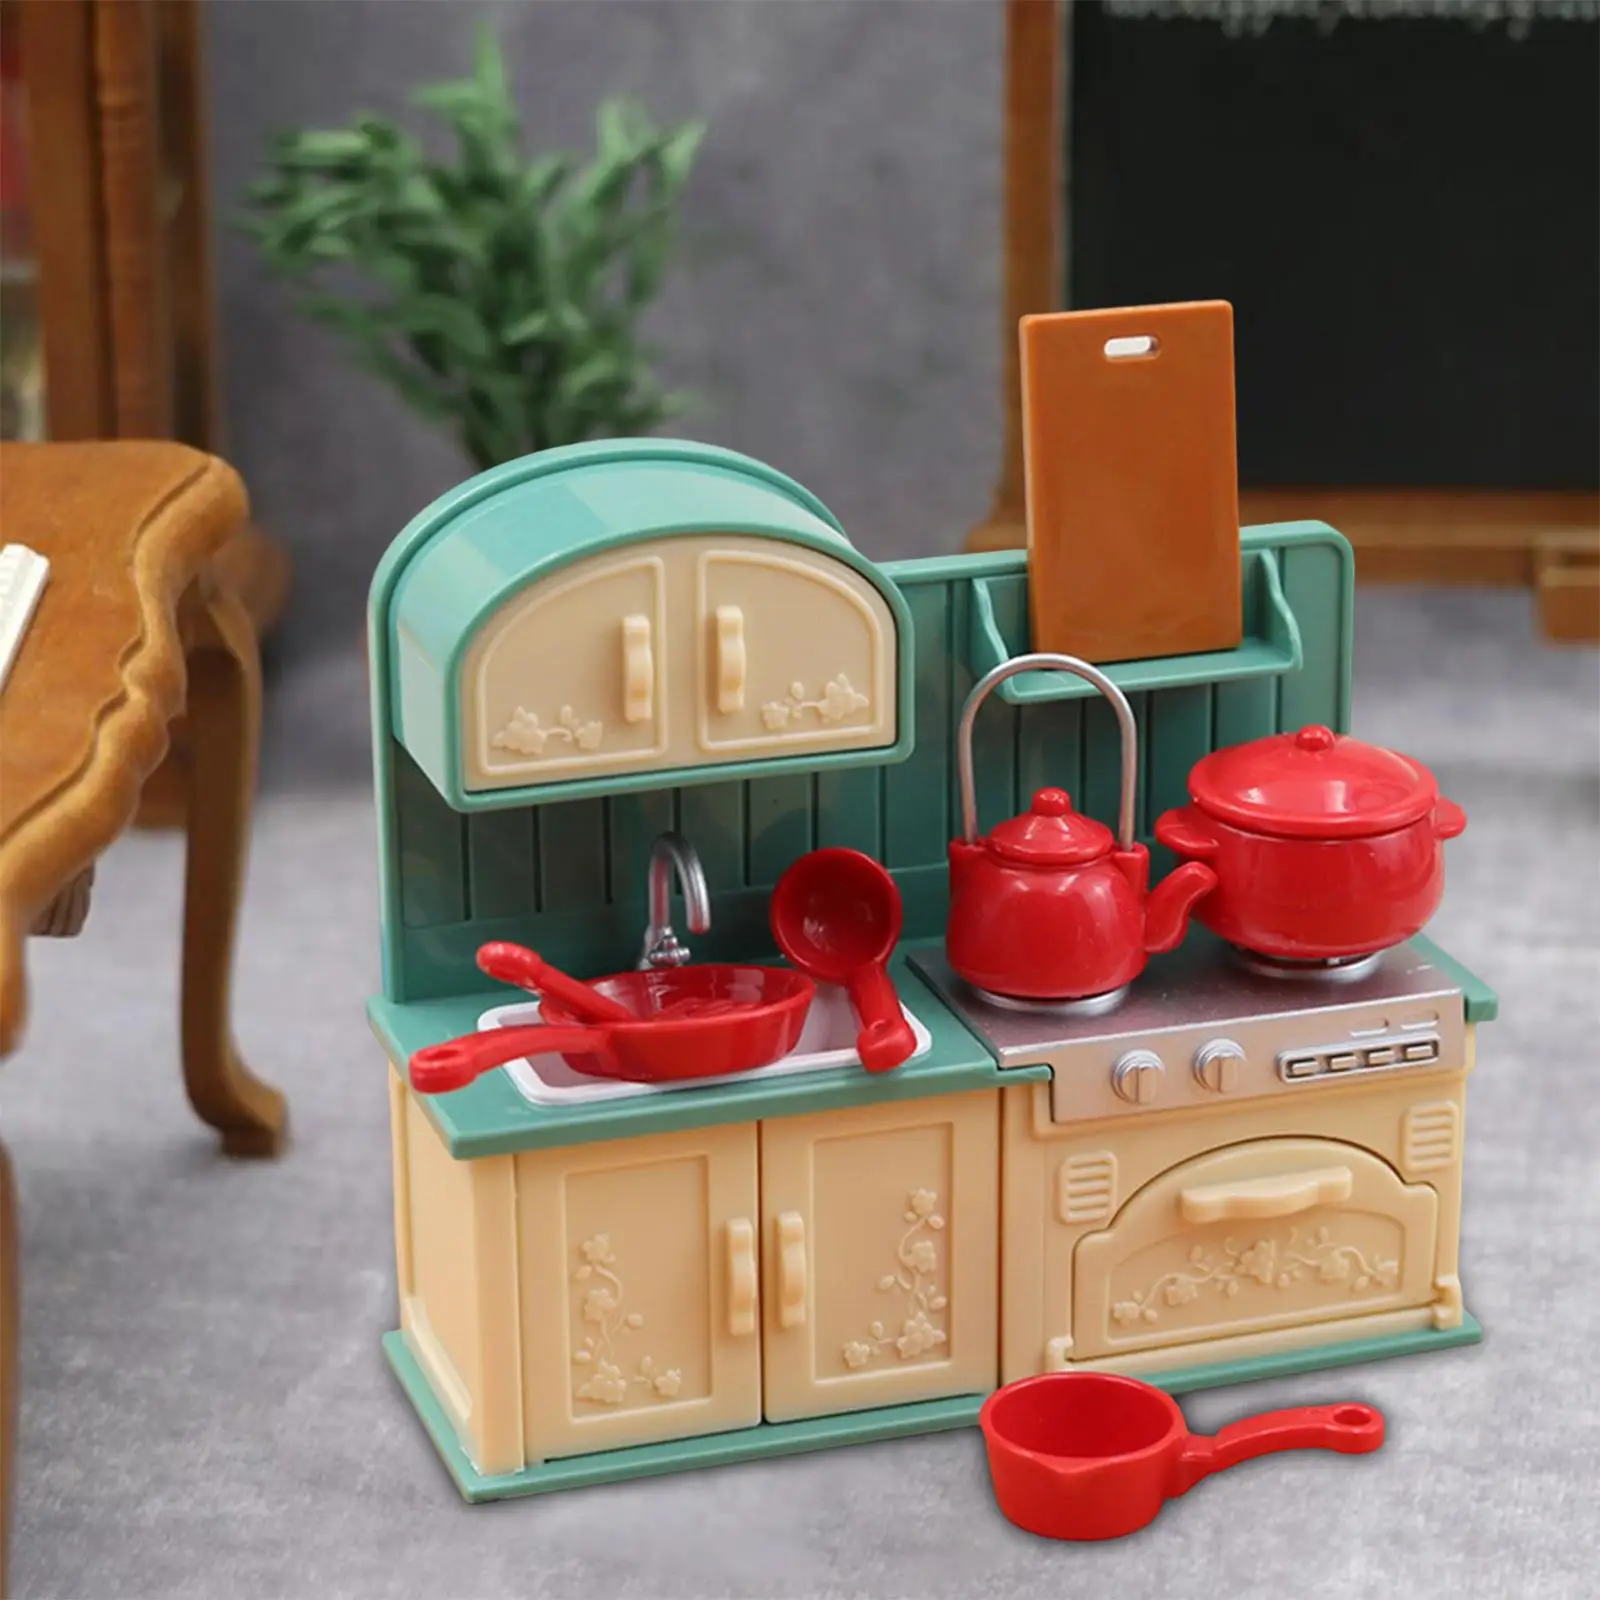 1:18 Scale Dollhouse Play Set Life Scenes Mini Accessory for Boys Holiday Gifts